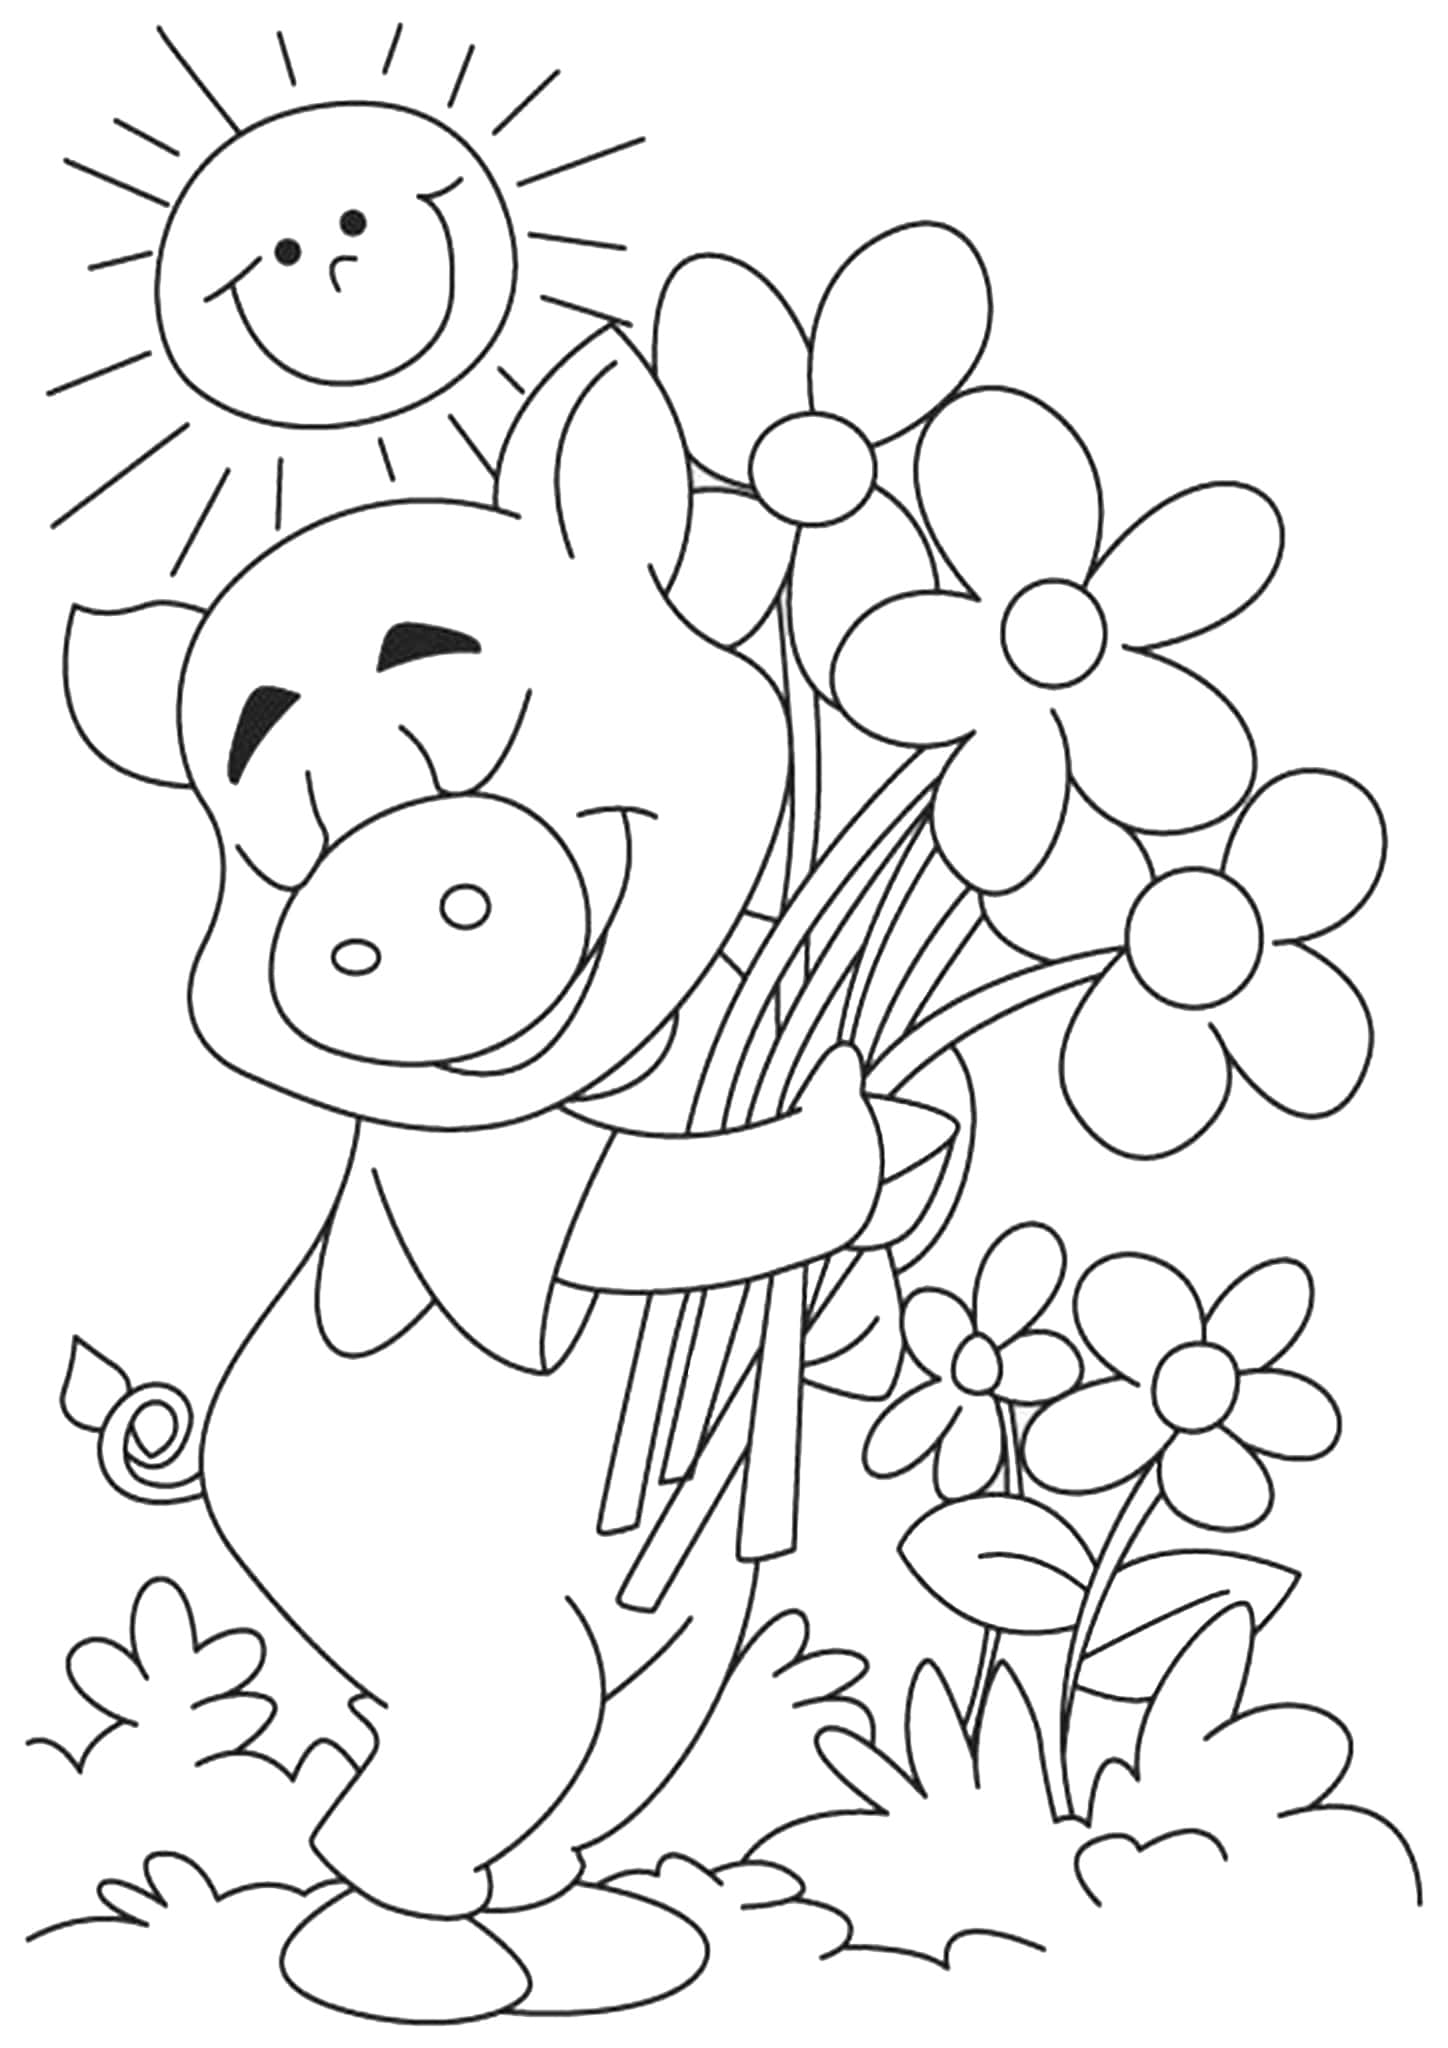 pig-coloring-page-coloring-page